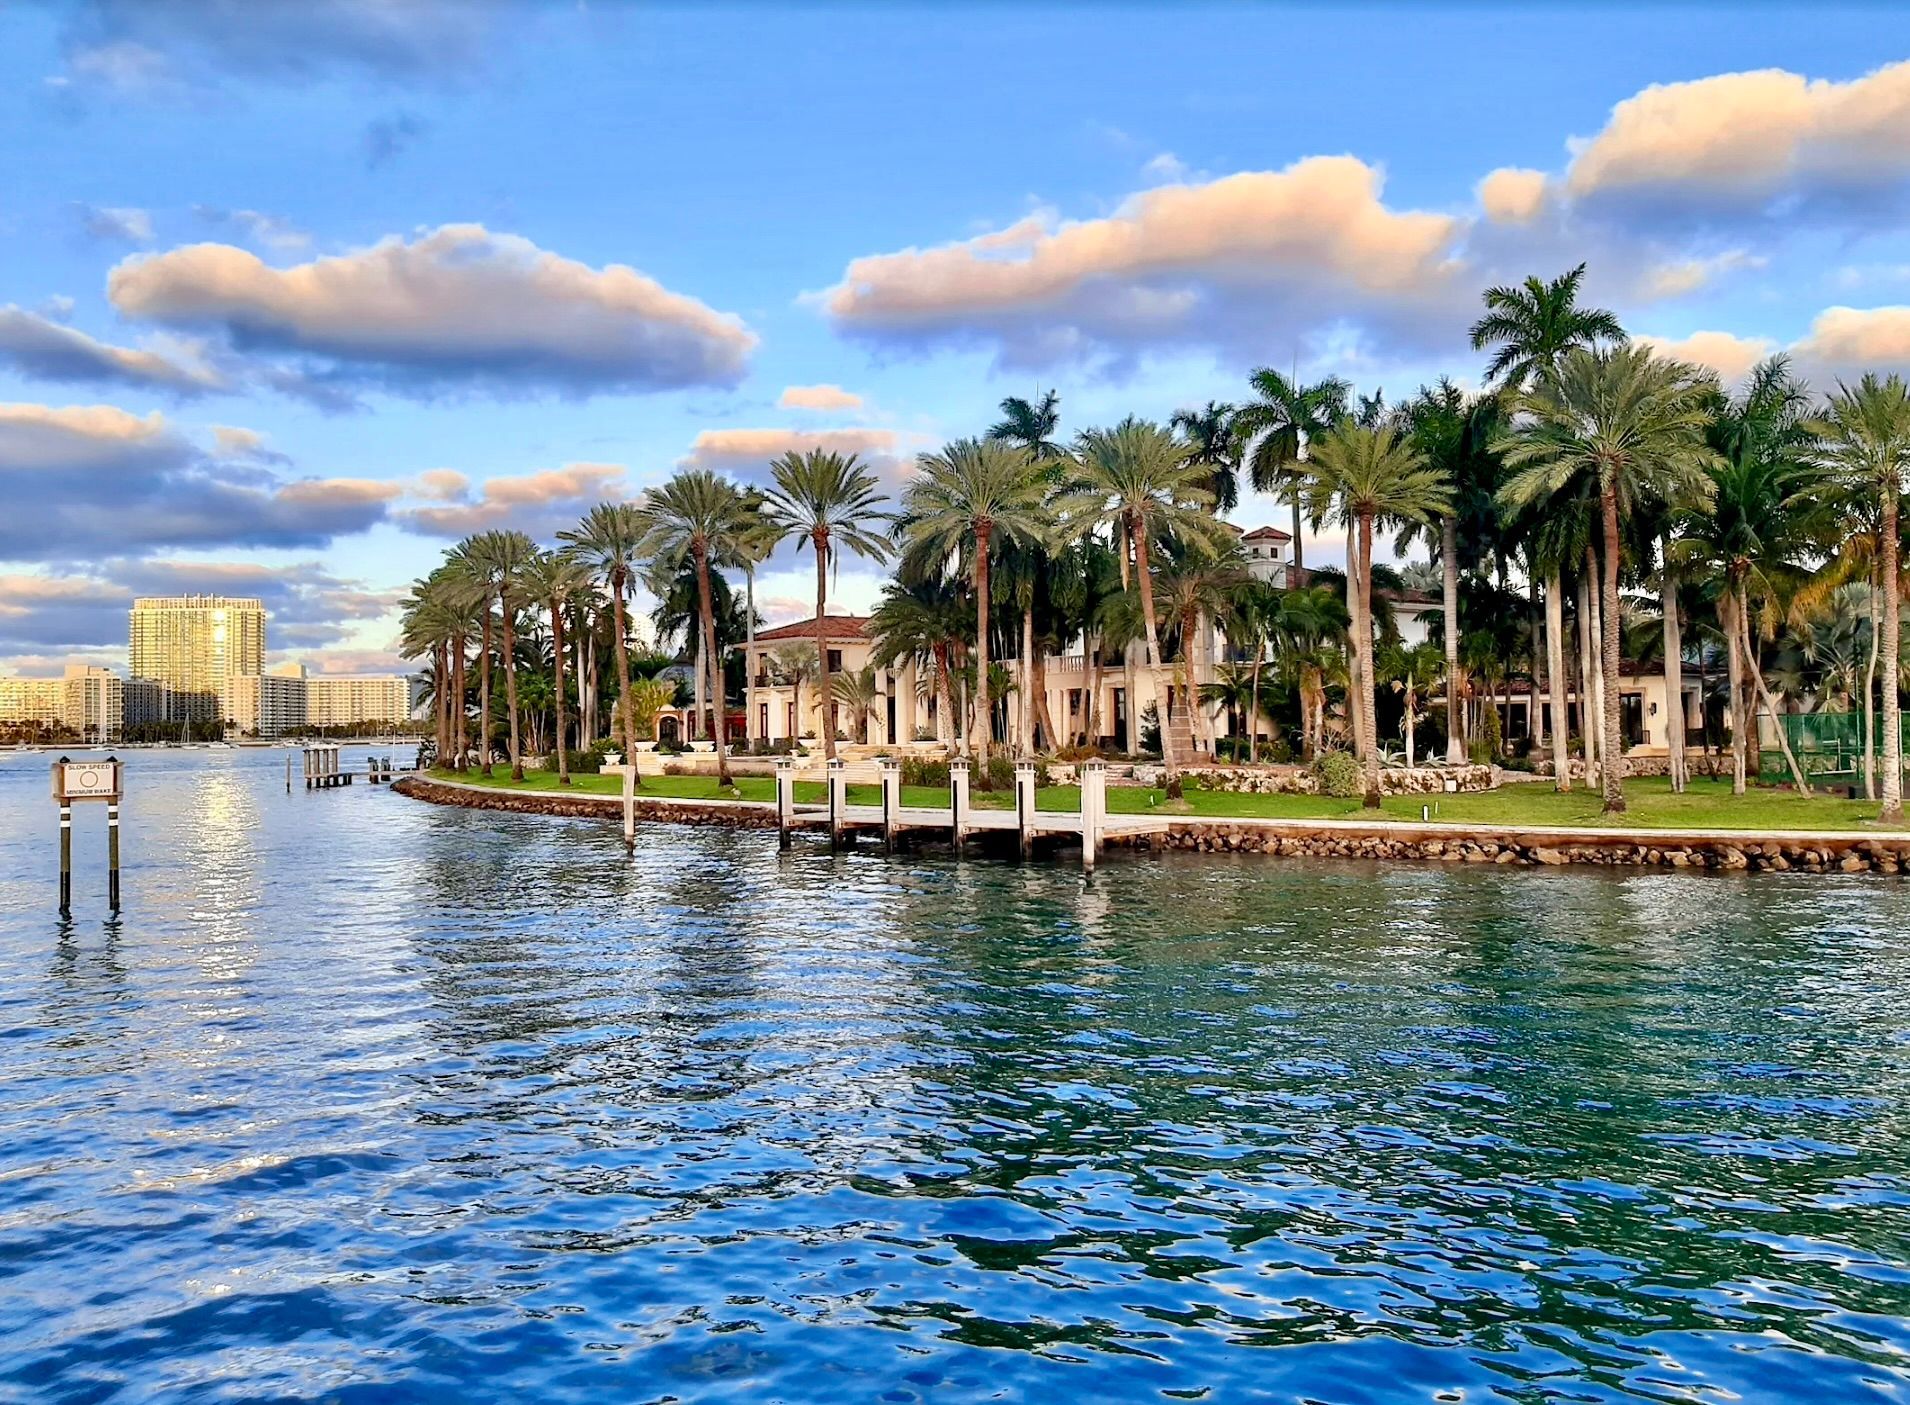 Miami beach, South Beach, fisher Island all on a sightseeing cruise. See the Downtown Miami Skyline on a boat tour, or a celebrity homes tour, a miami boat tour is a most do.